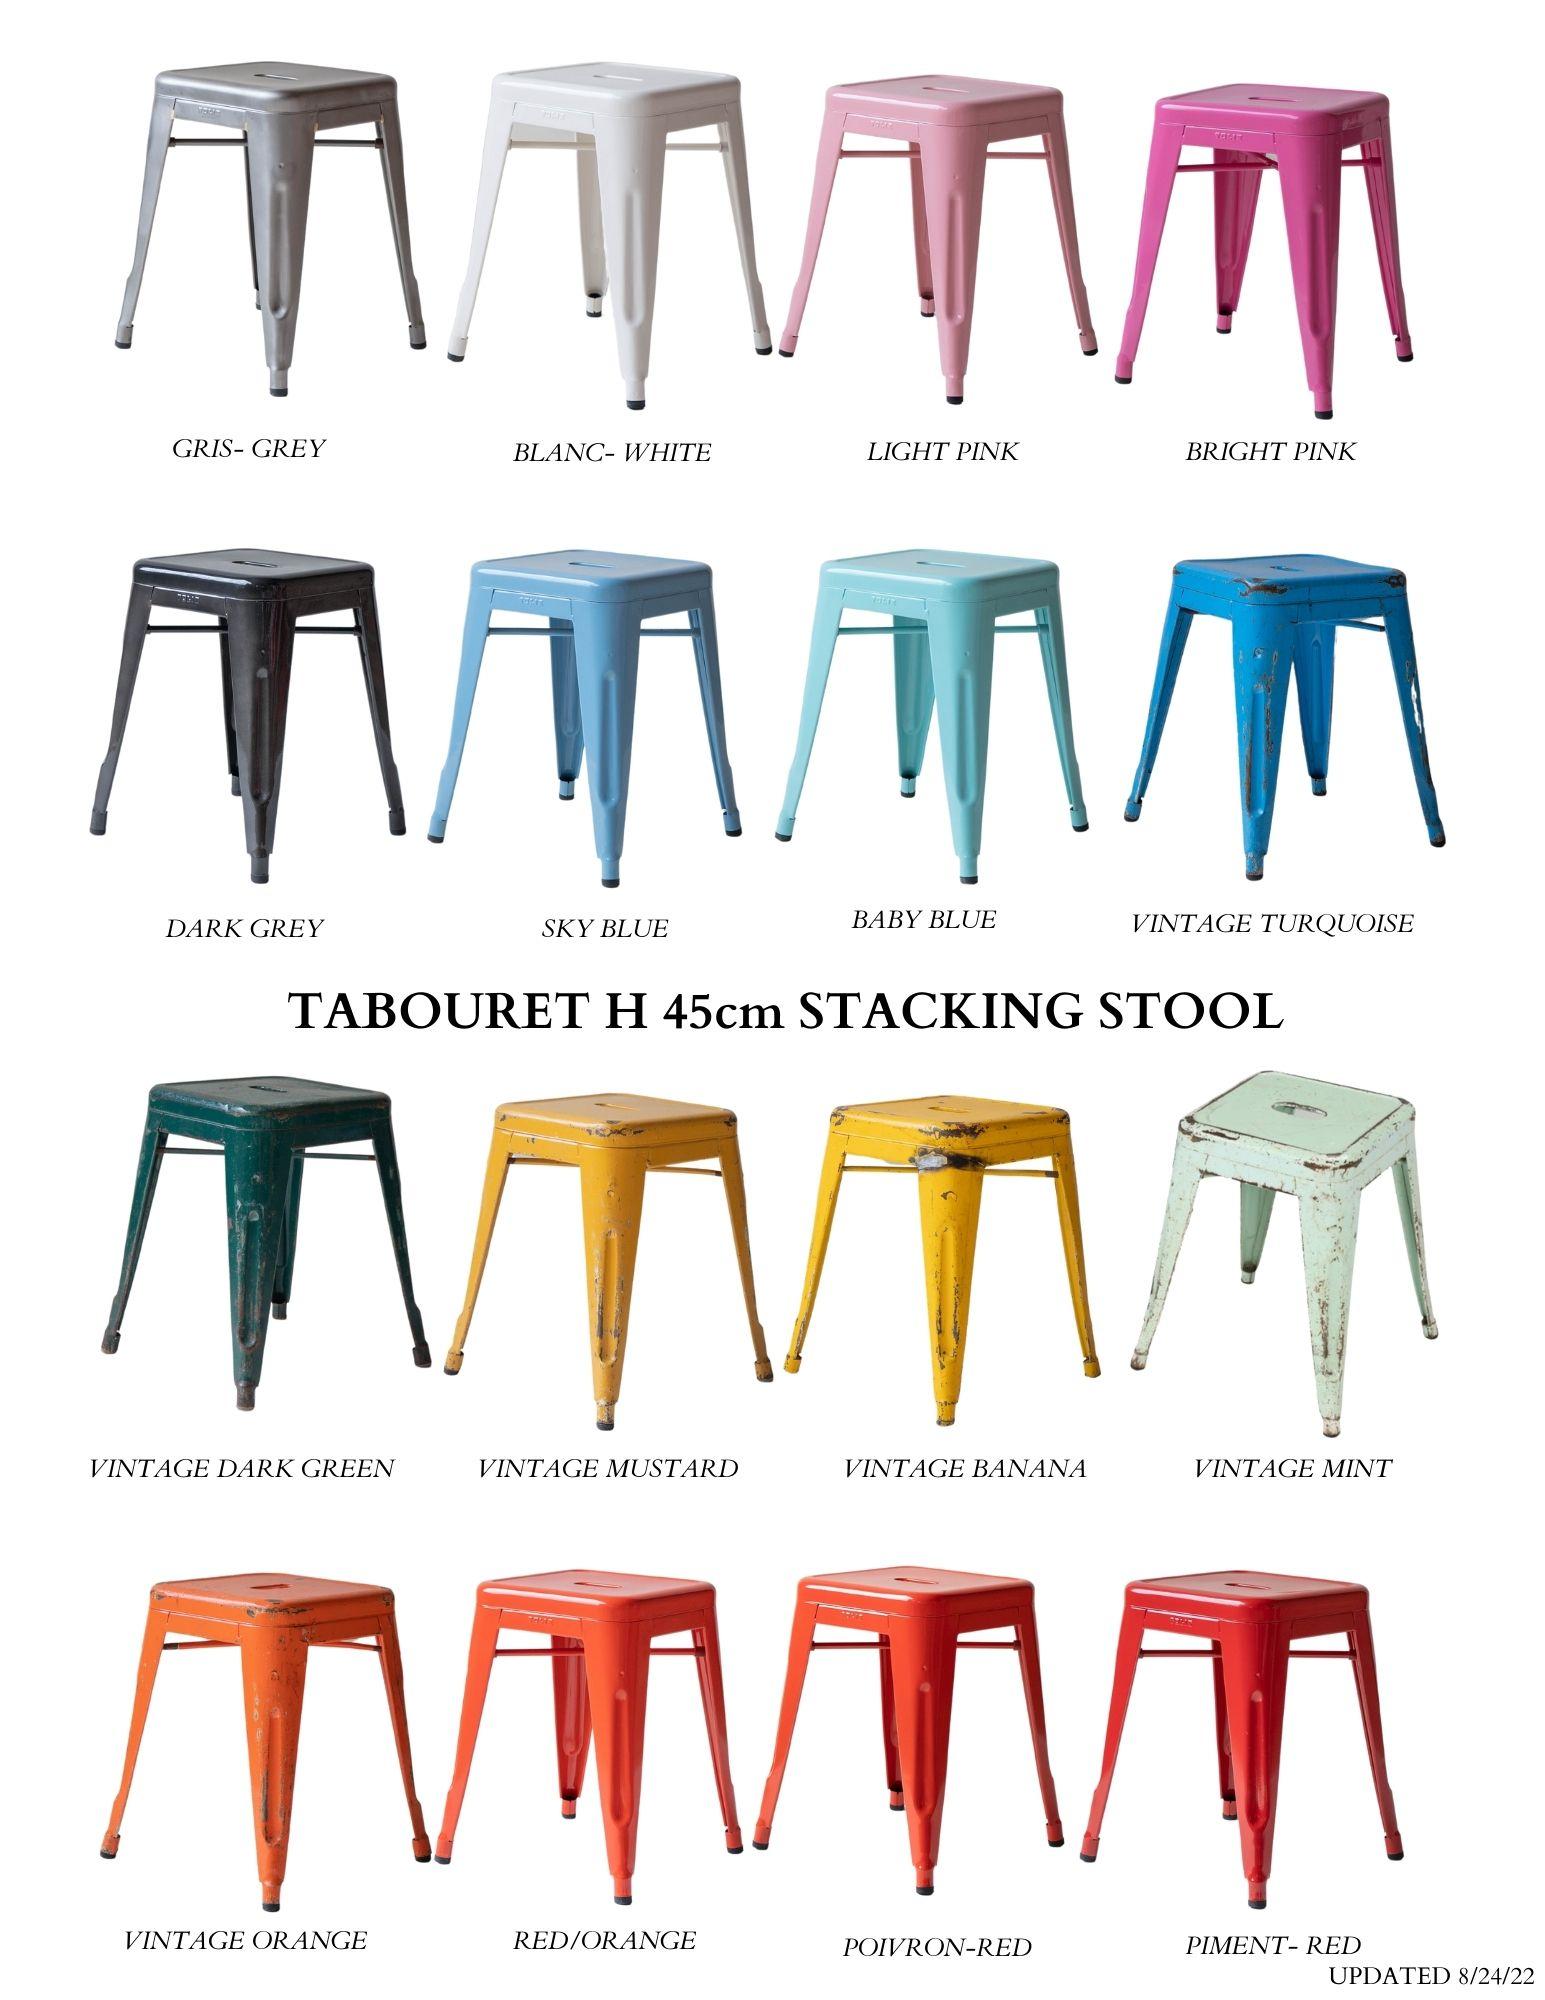 Contemporary Genuine Tolix Stacking Stools 100's Showroom Samples to Choose from Most Colors For Sale